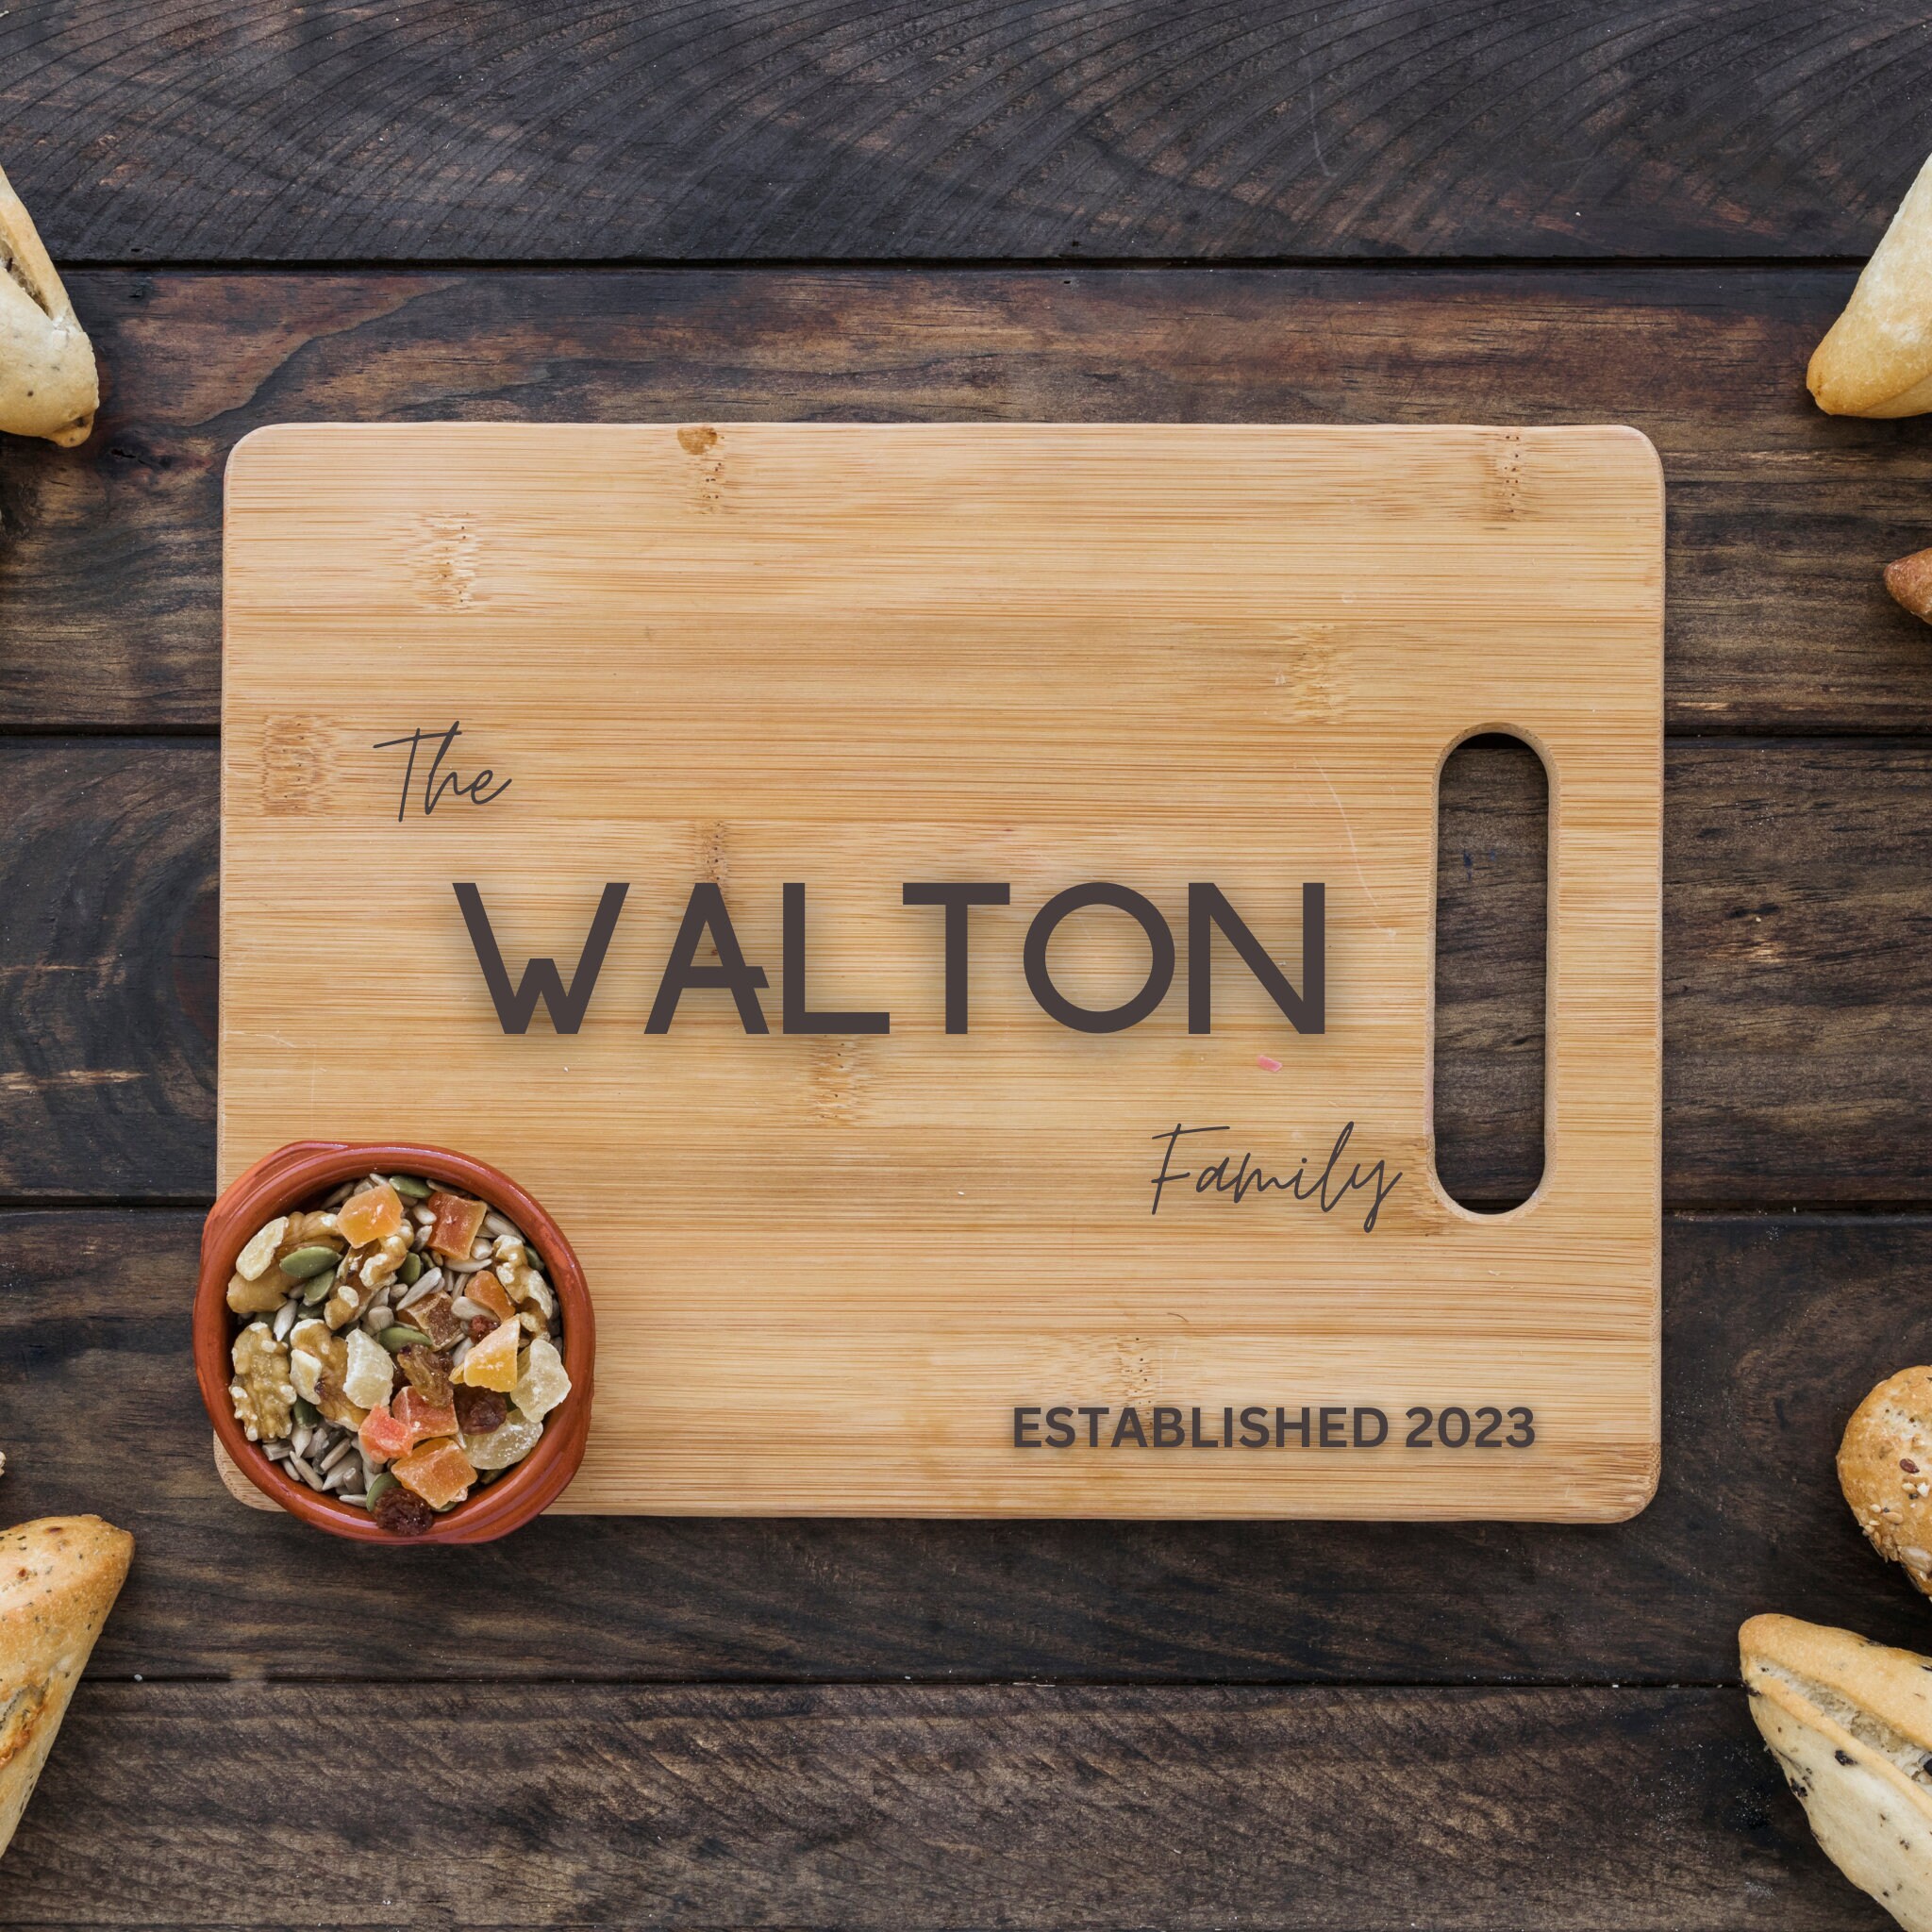 Family Name Personalized Bamboo Cutting Board